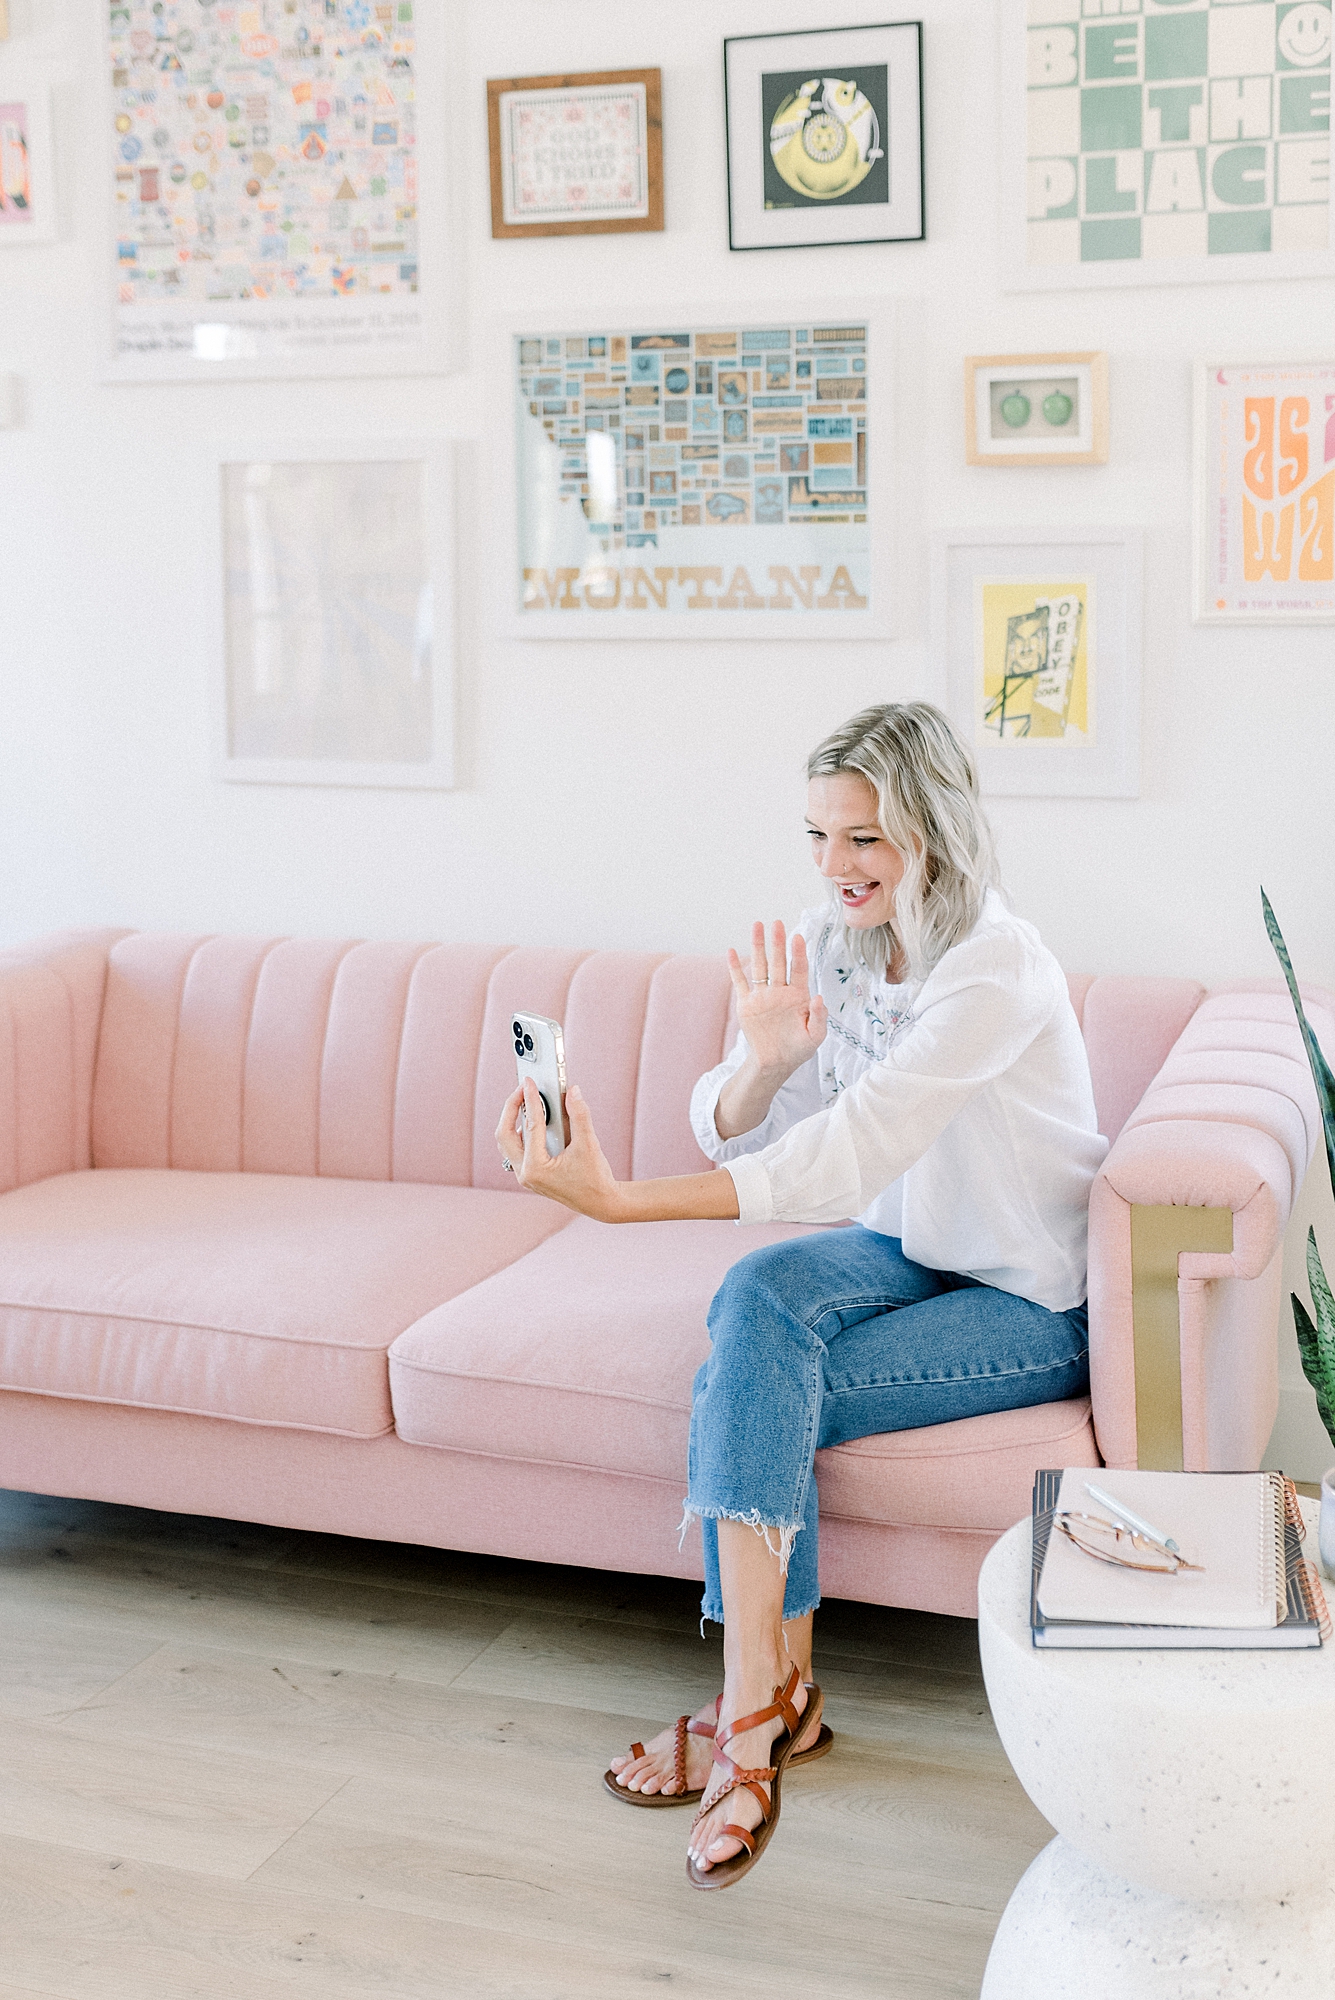 a_woman_sitting_on_pink_couch_holding_a_cup_of_coffee_for_her_branding_session_by_Dolly_DeLong_Photography_in_Bozeman_Montana